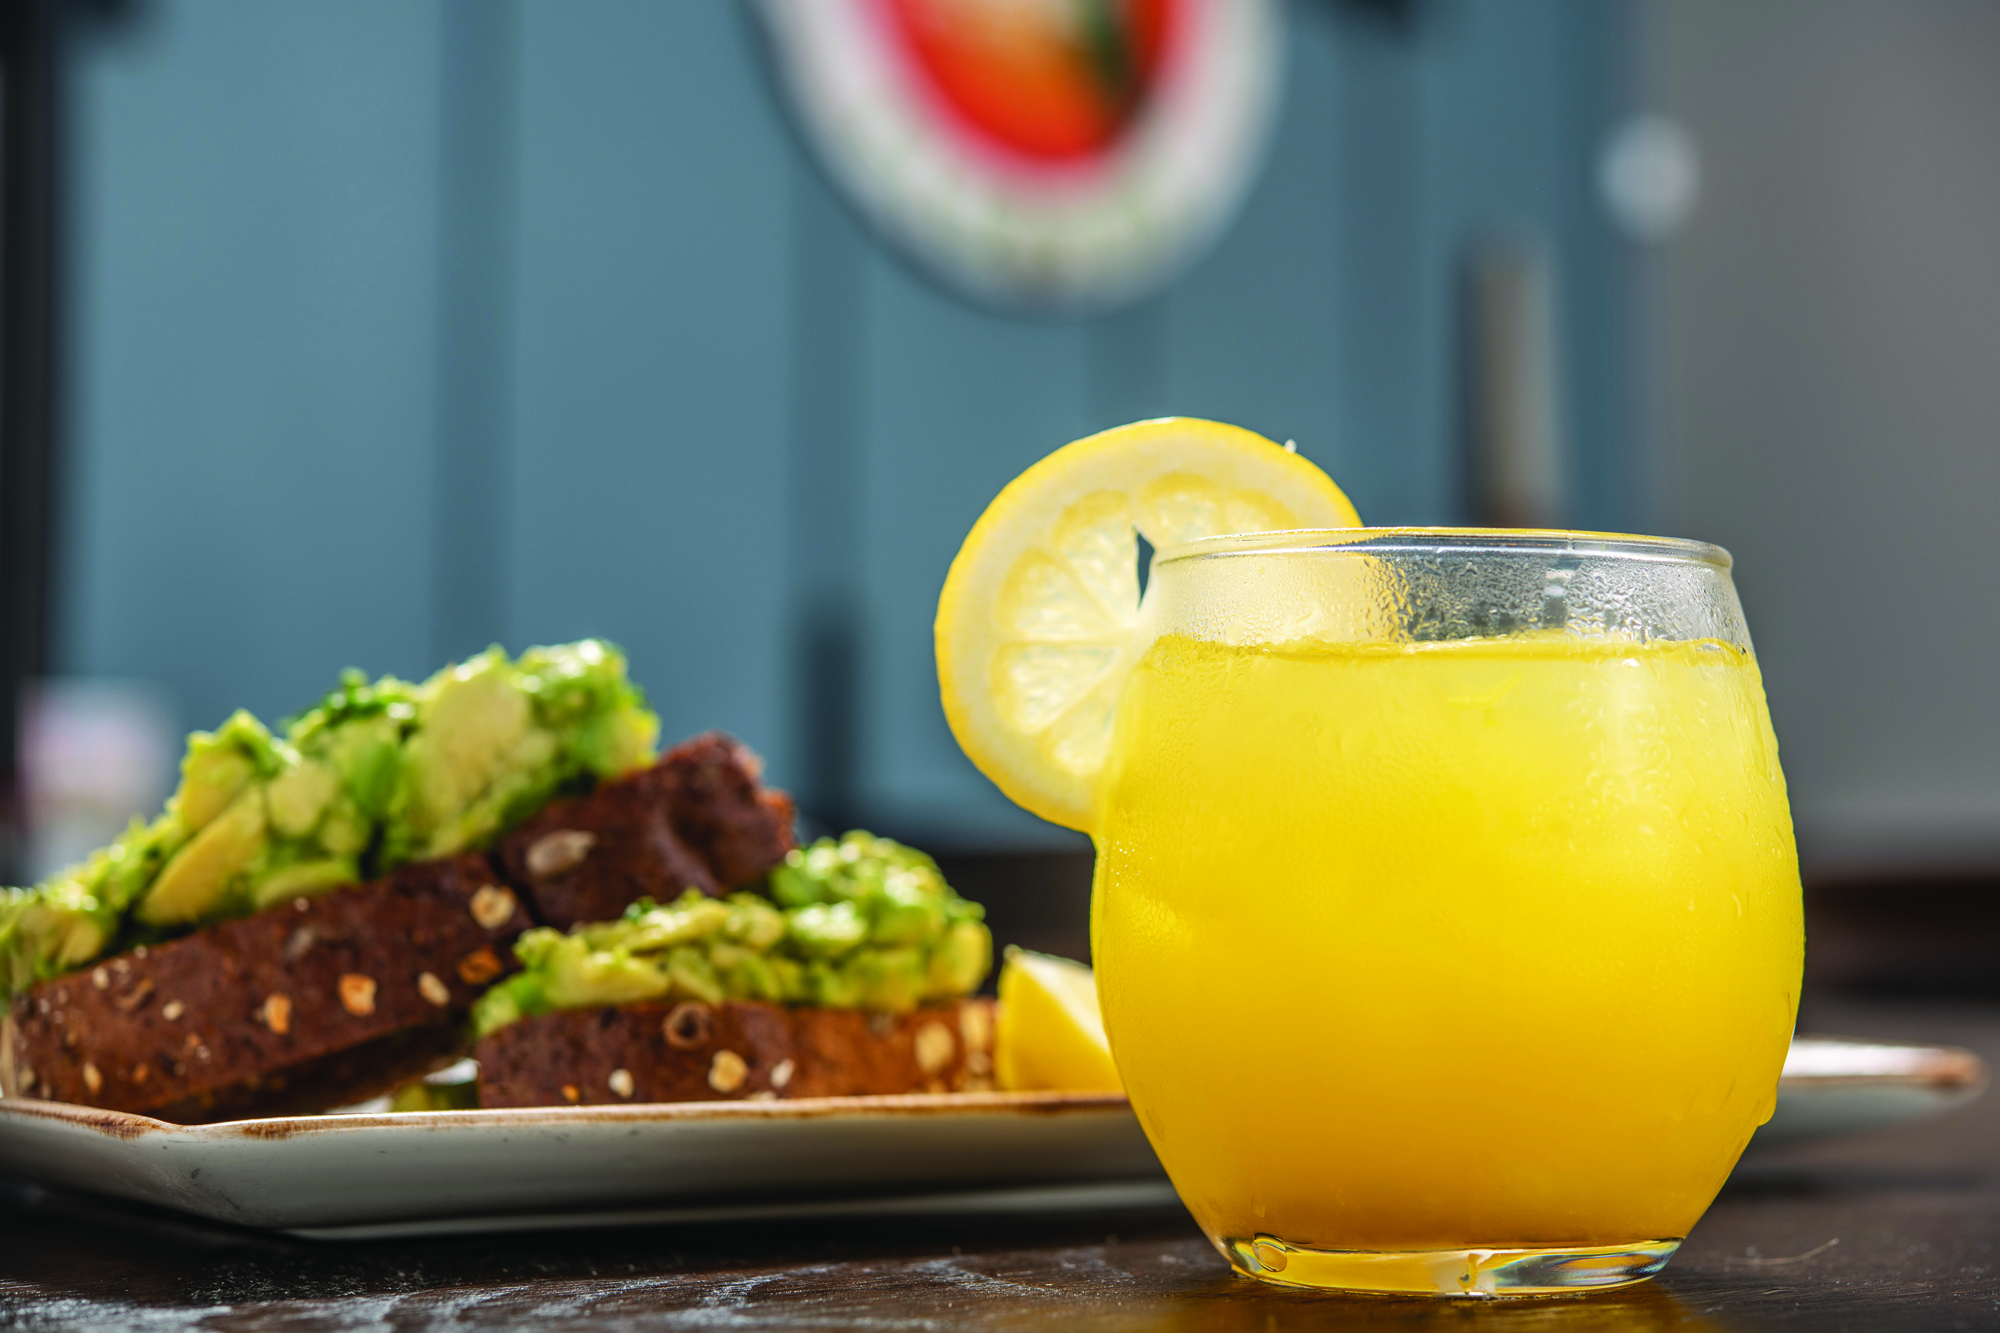 Courtesy. Breakfast, brunch and lunch chain First Watch will bring alcohol to its restaurants for the first time since its founding in 1983.